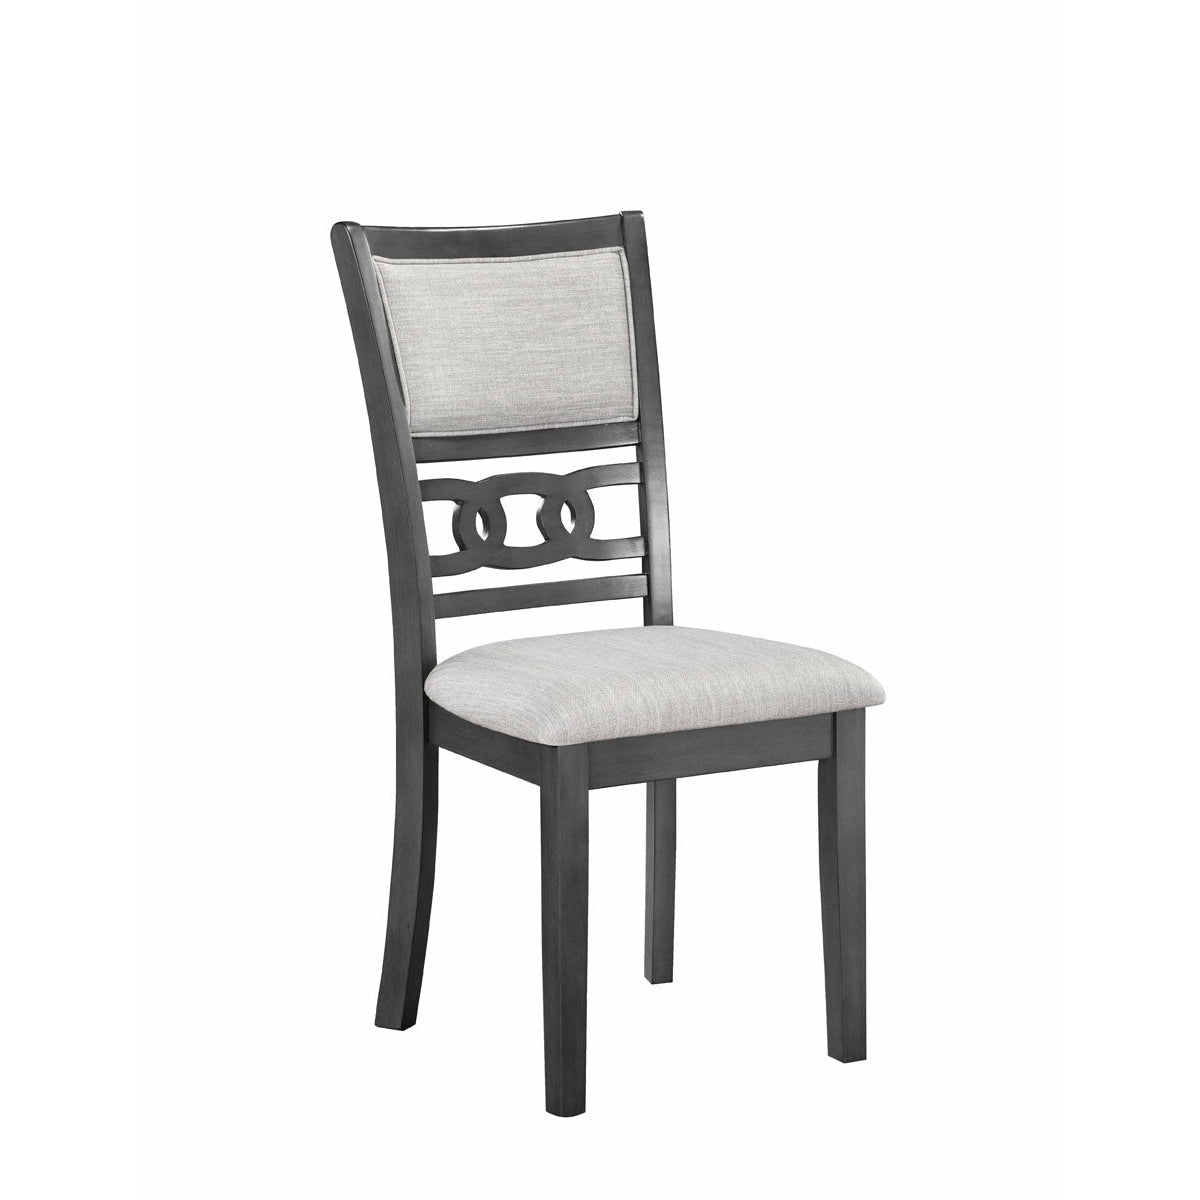 Gia Dining Chair - Grey